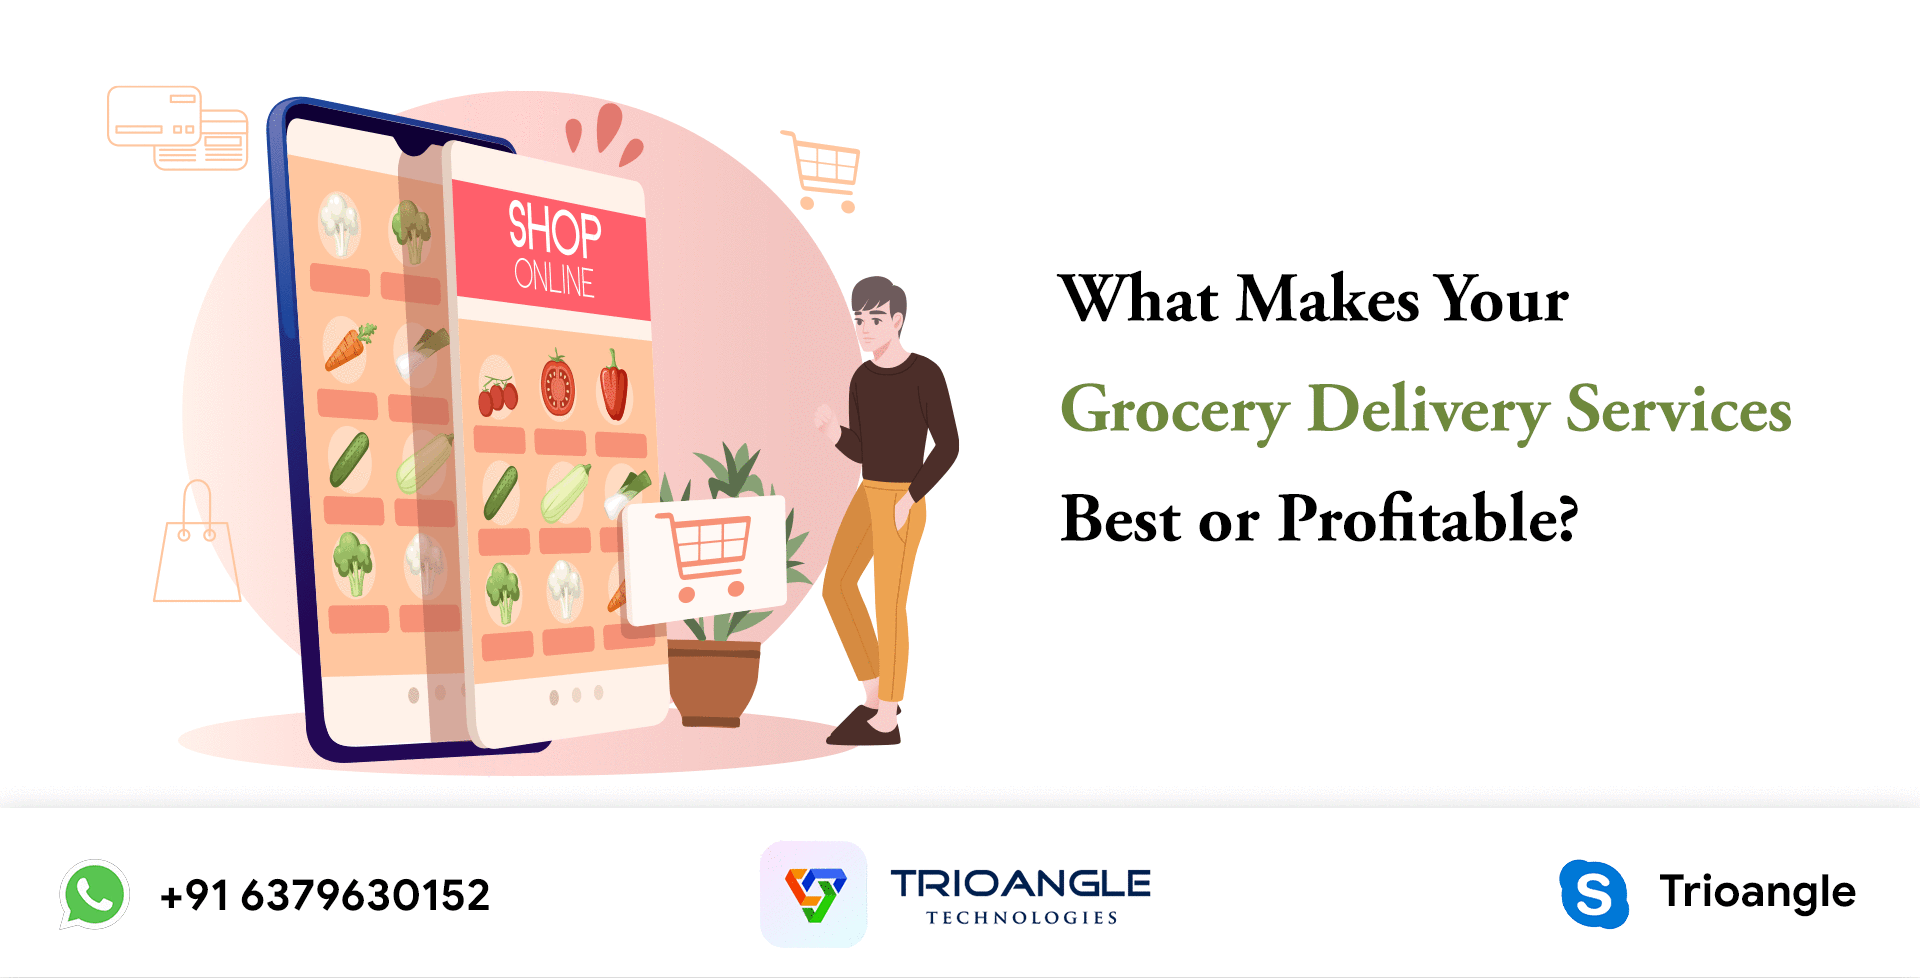 What Makes Your Grocery Delivery Services Best or Profitable?